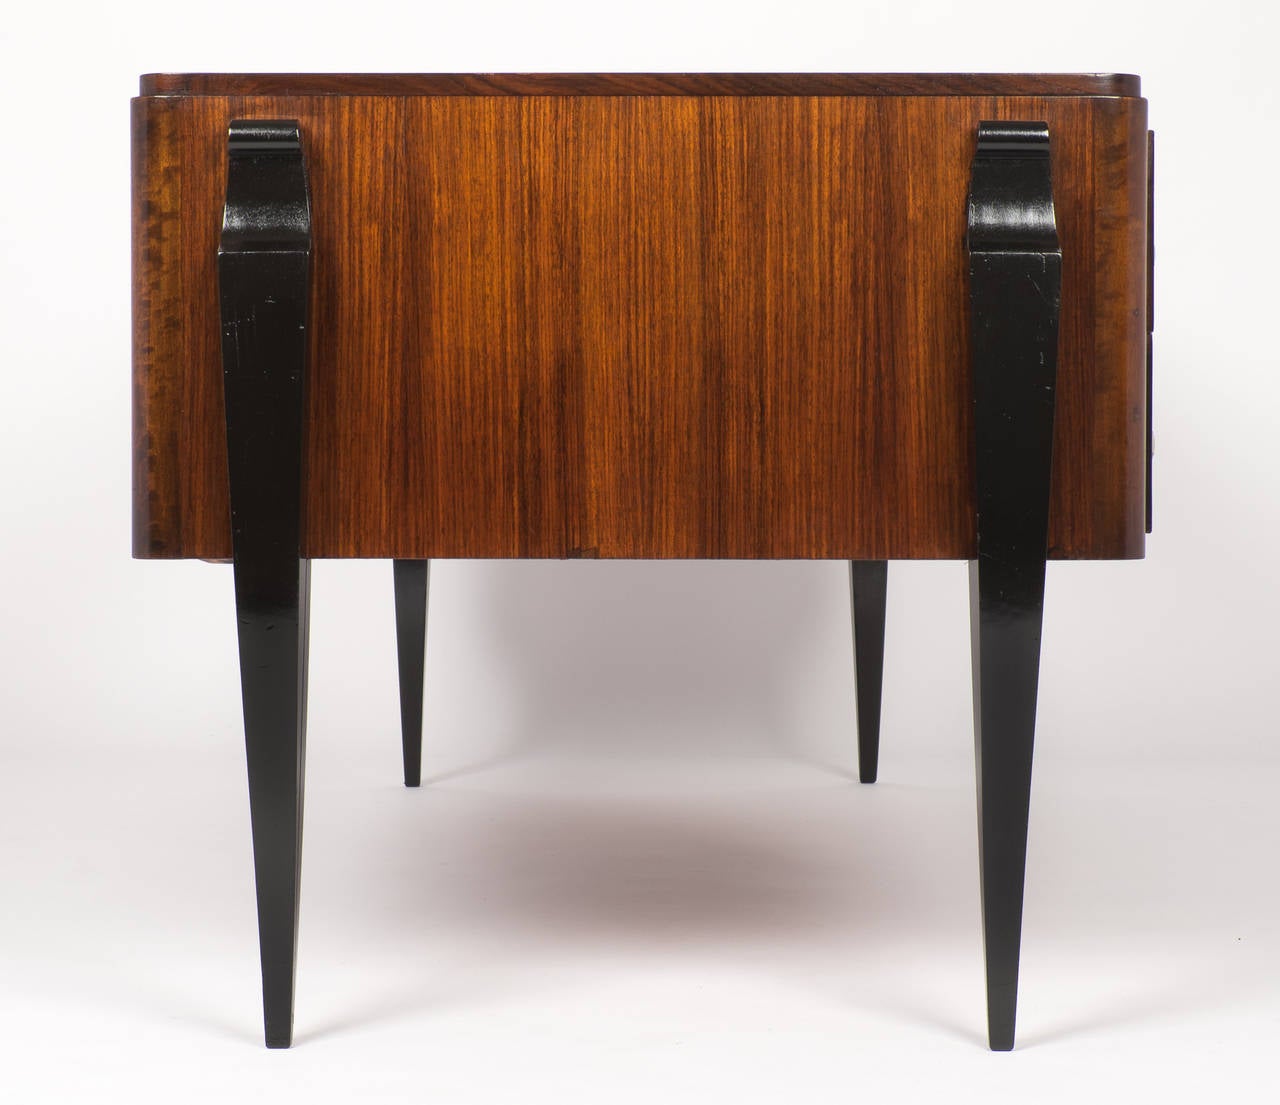 Mid-20th Century French Art Deco Period Rosewood Desk